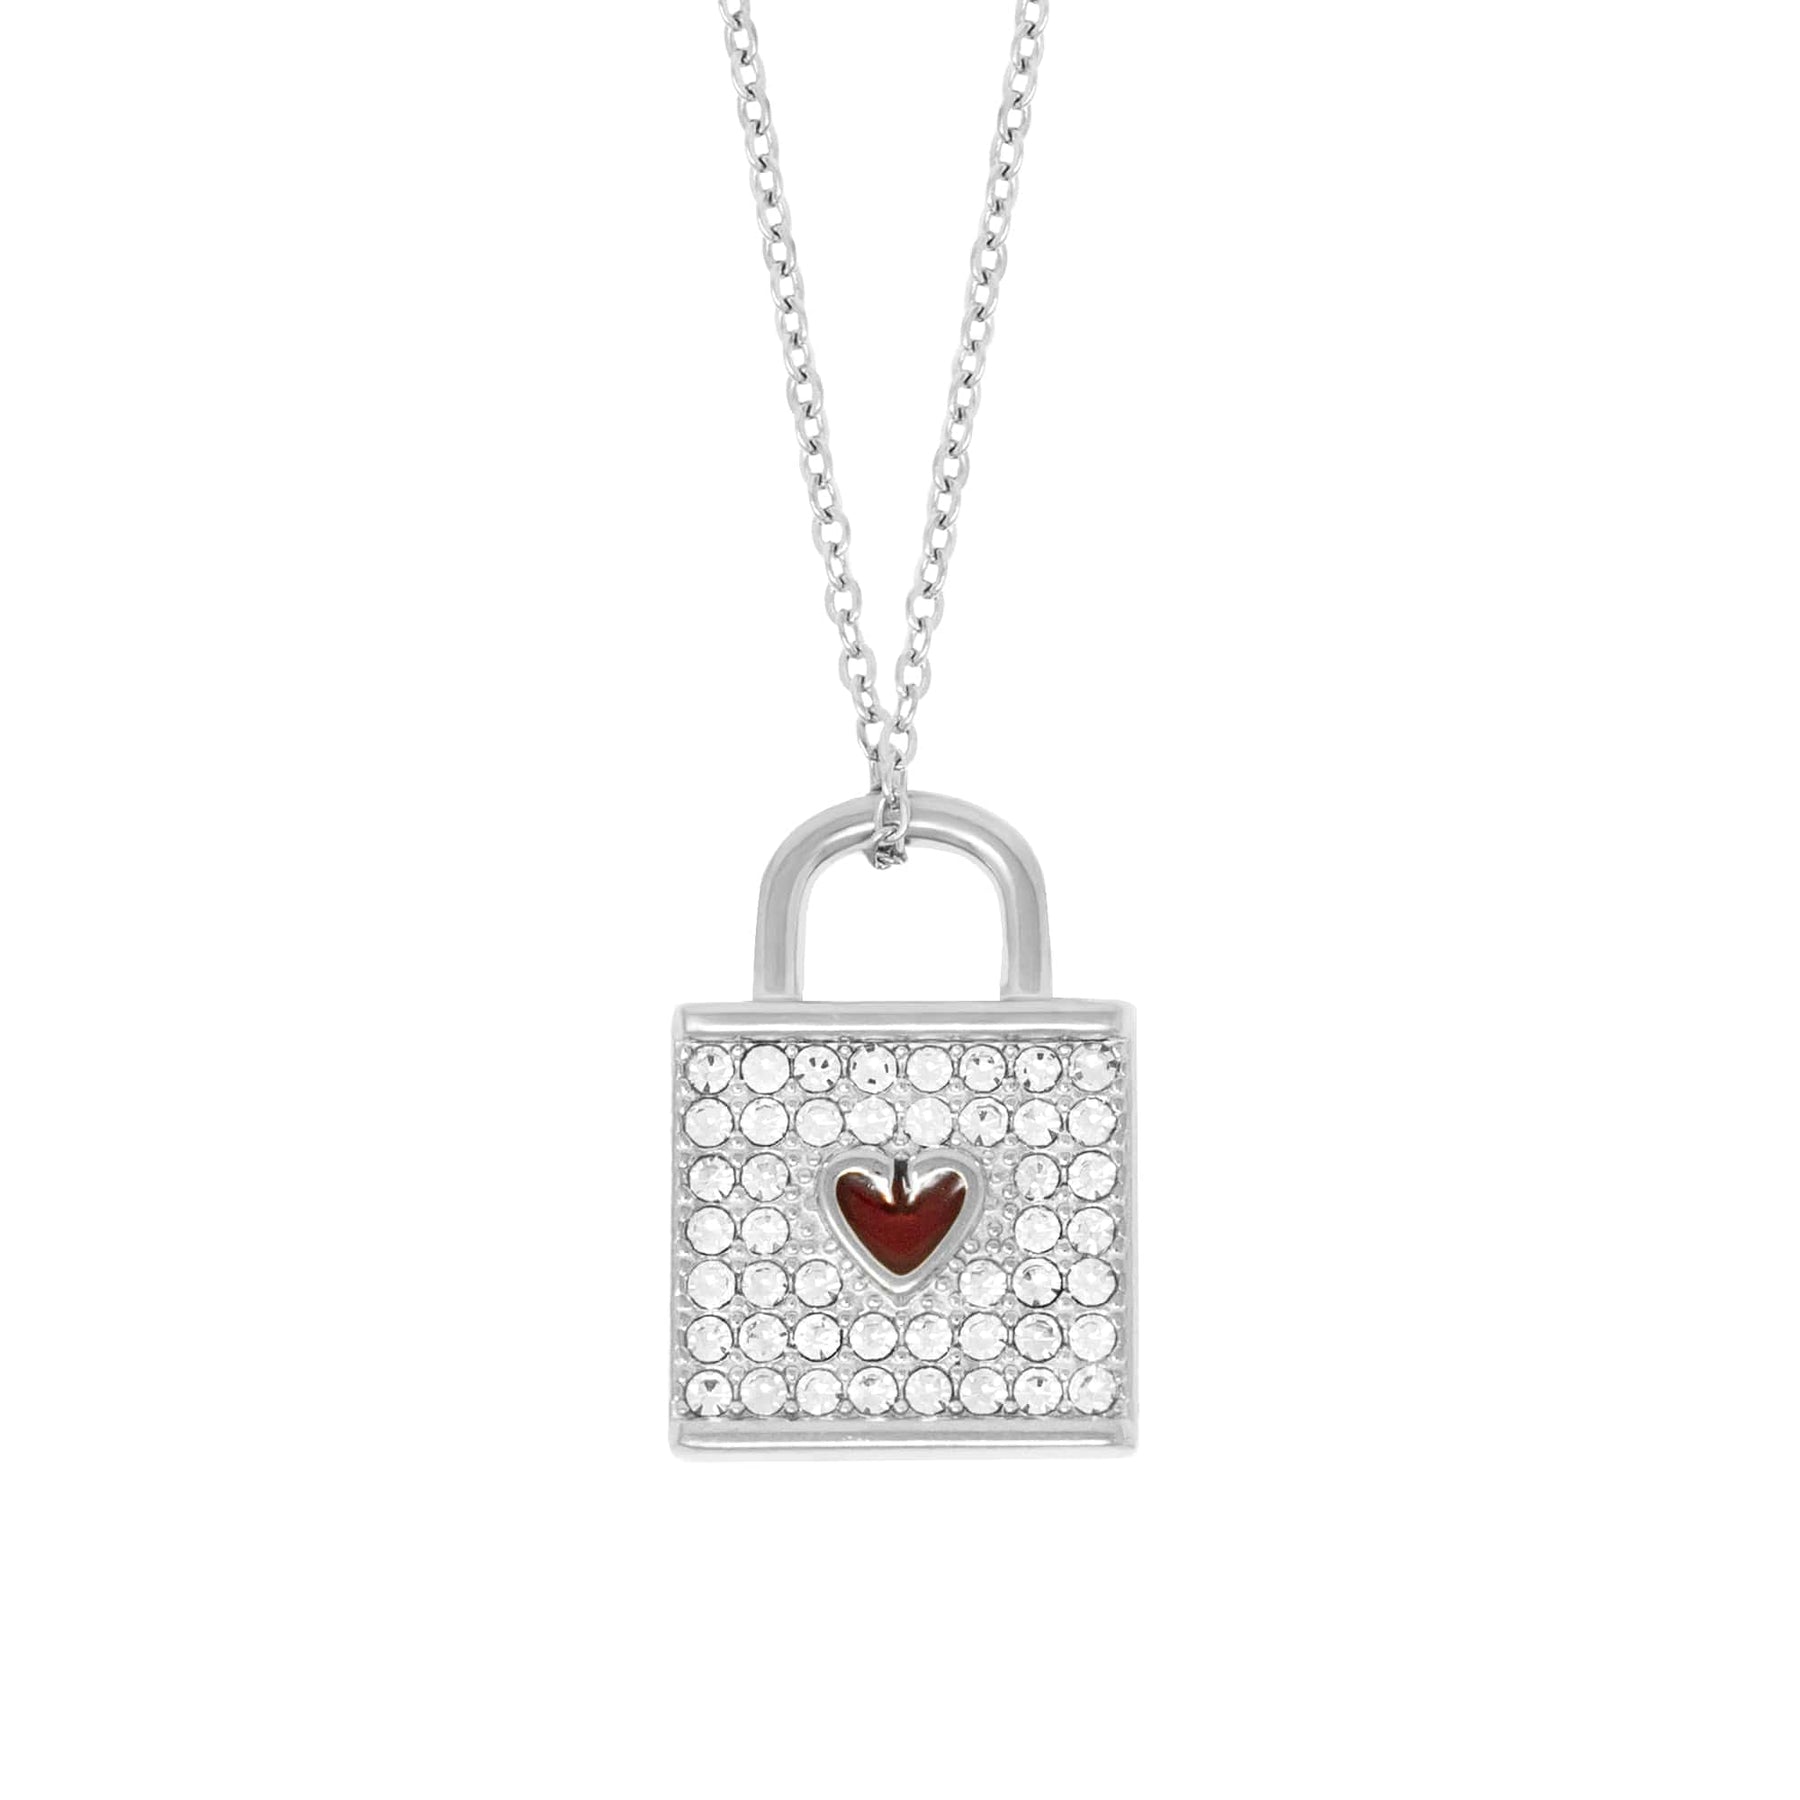 BohoMoon Stainless Steel Love Lock Necklace Silver